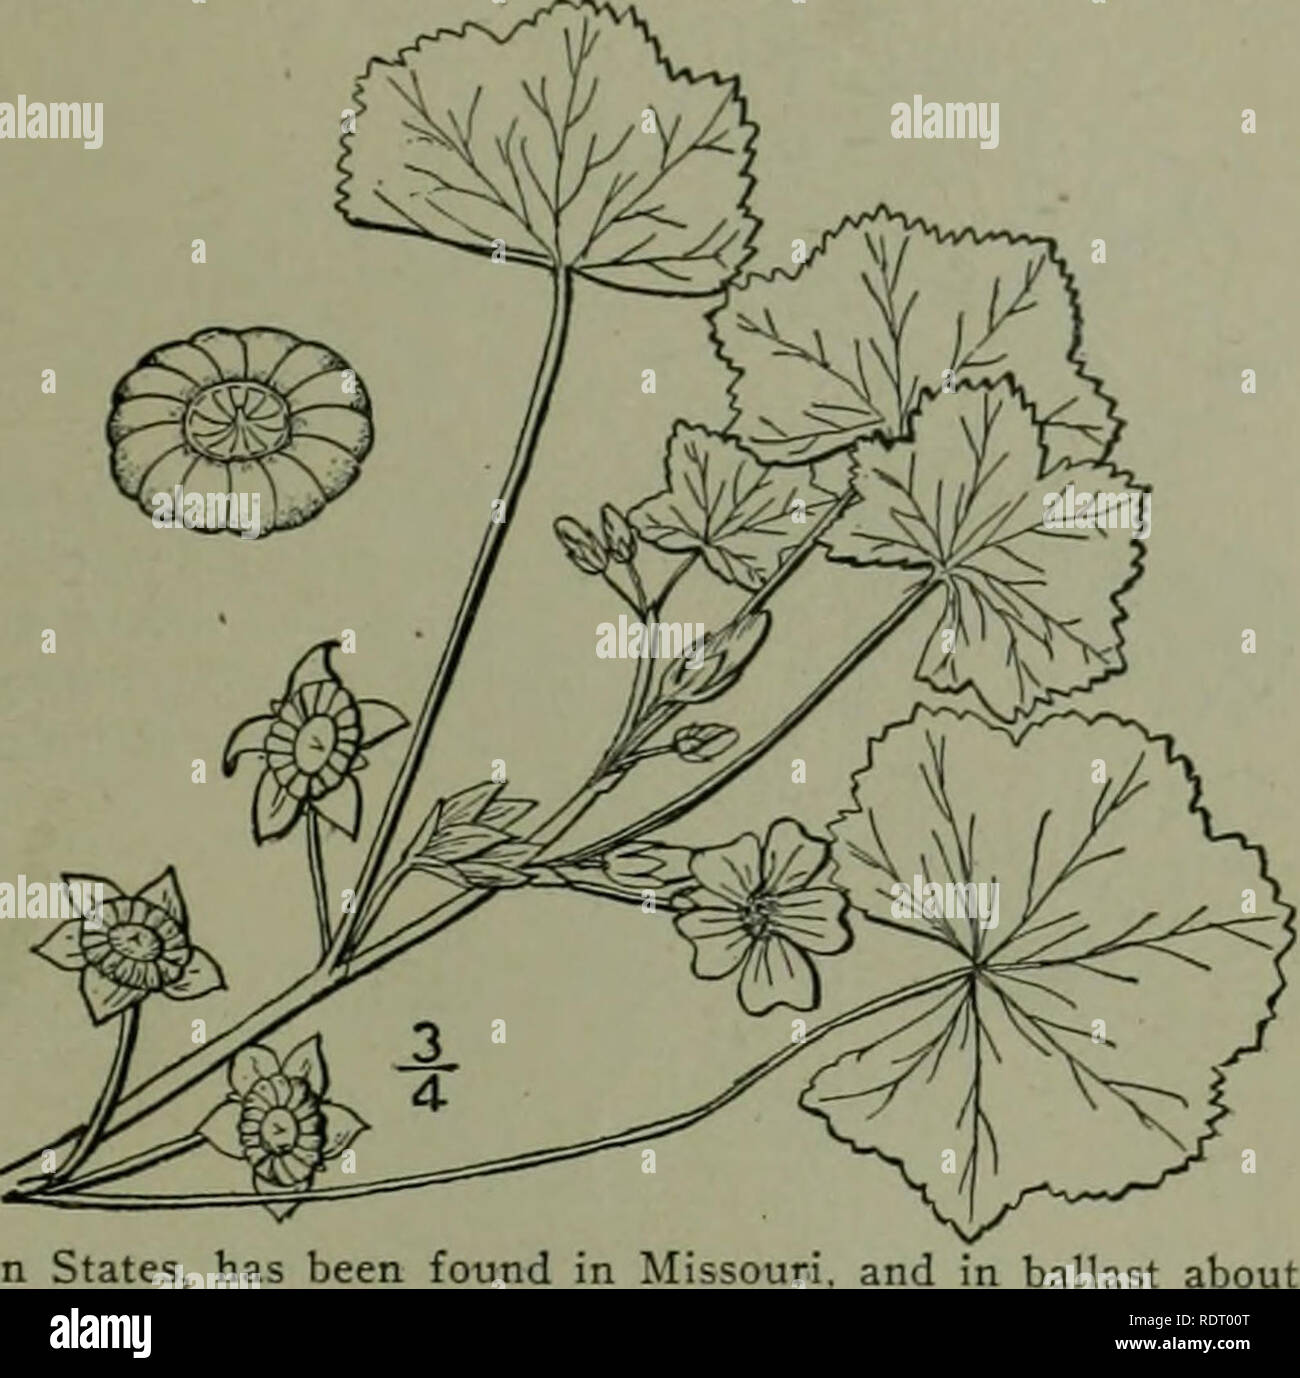 . An illustrated flora of the northern United States, Canada and the British possessions : from Newfoundland to the parallel of the southern boundary of Virginia and from the Atlantic Ocean westward to the 102nd meridian. Botany. Genus 2. MALLOW FAMILY. 515 2. Malva rotundifolia L. Low, Dwarf or Running Mallow. Cheeses. Fig. 2849. M. rolumiifolia L. Sp. PI. 688. 1753. -Annual or biennial, procumbent and spreading from a deep root, branched at the base, stems 4-12' long. Leaves orbicular-reniform, 1-3' wide, cordate, with 5-9 broad shallow dentate-crenate lobes; pe- tioles slender, 3'-6' long;  Stock Photo